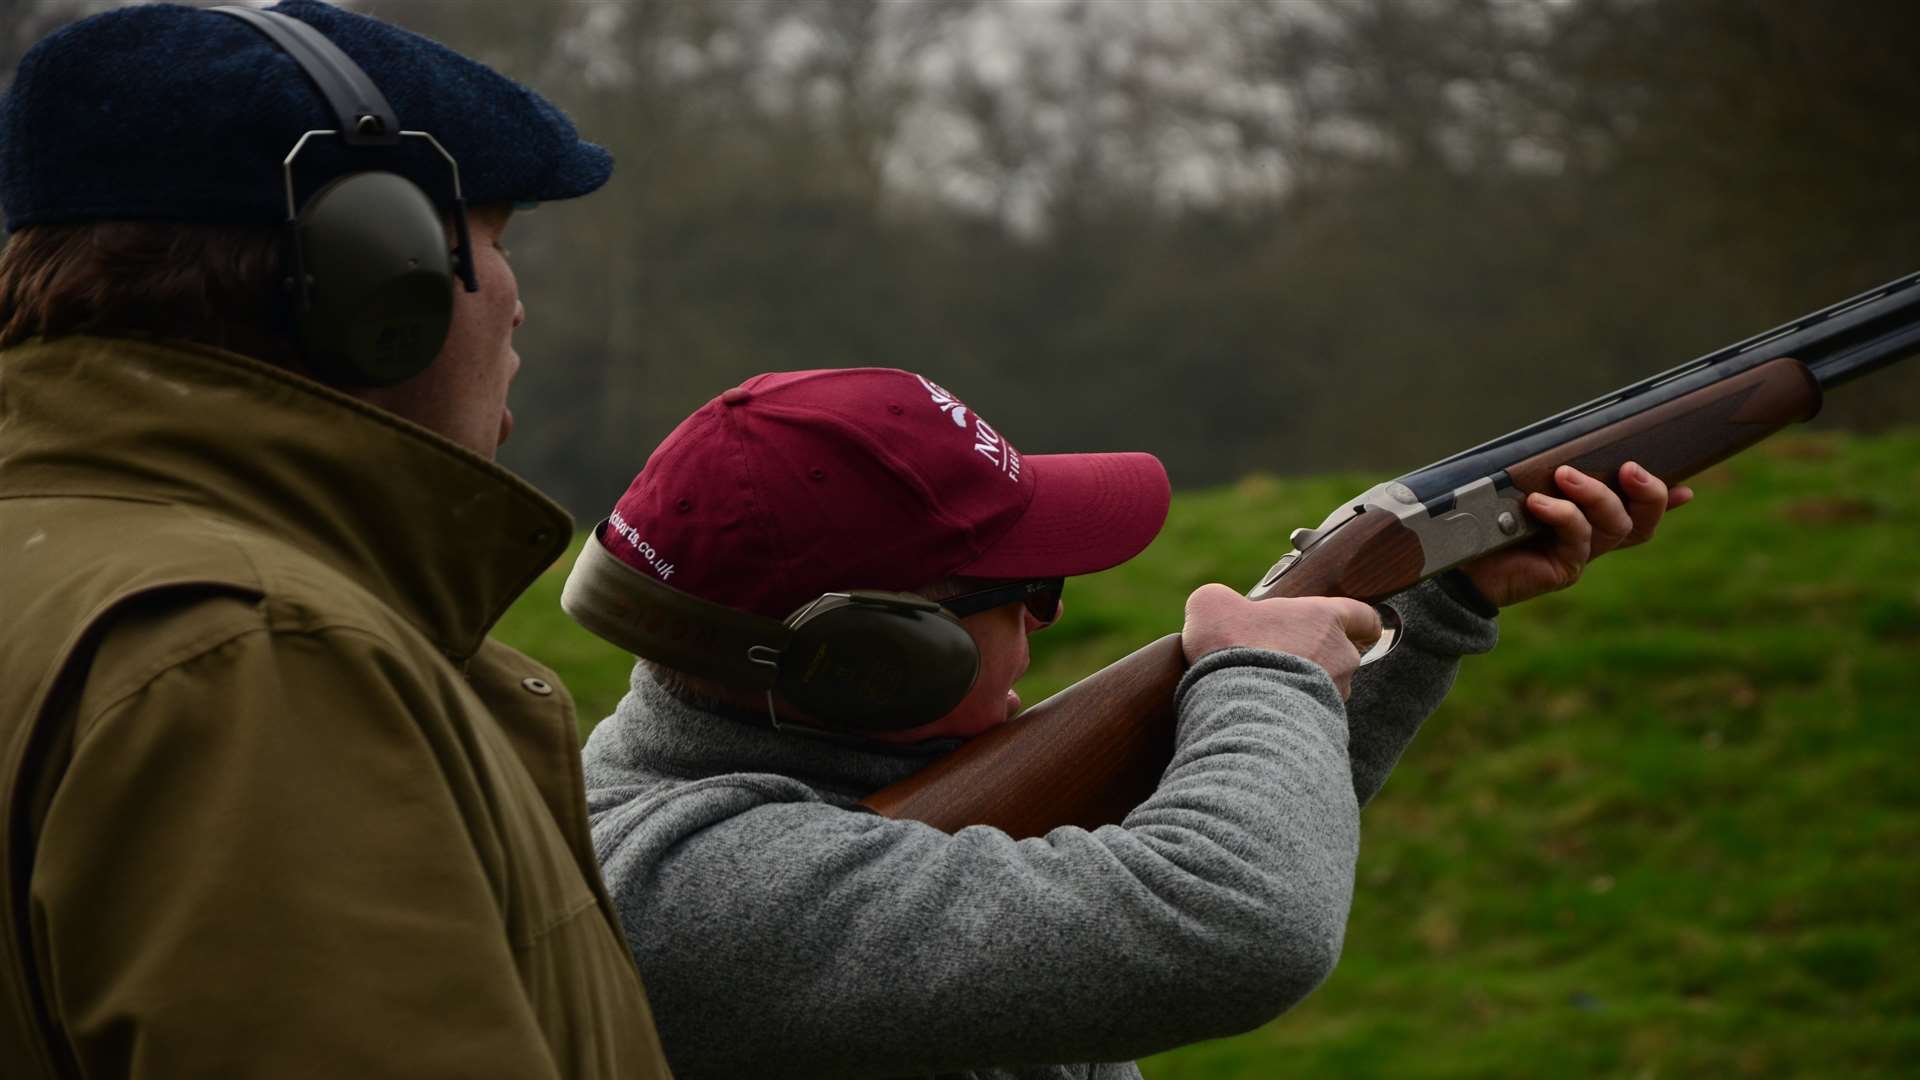 Jeff Fuidge with instructor and professional sports shooter Ross Straker at Noble Field Sports' clay shoot on Querryes Estate, Westerham